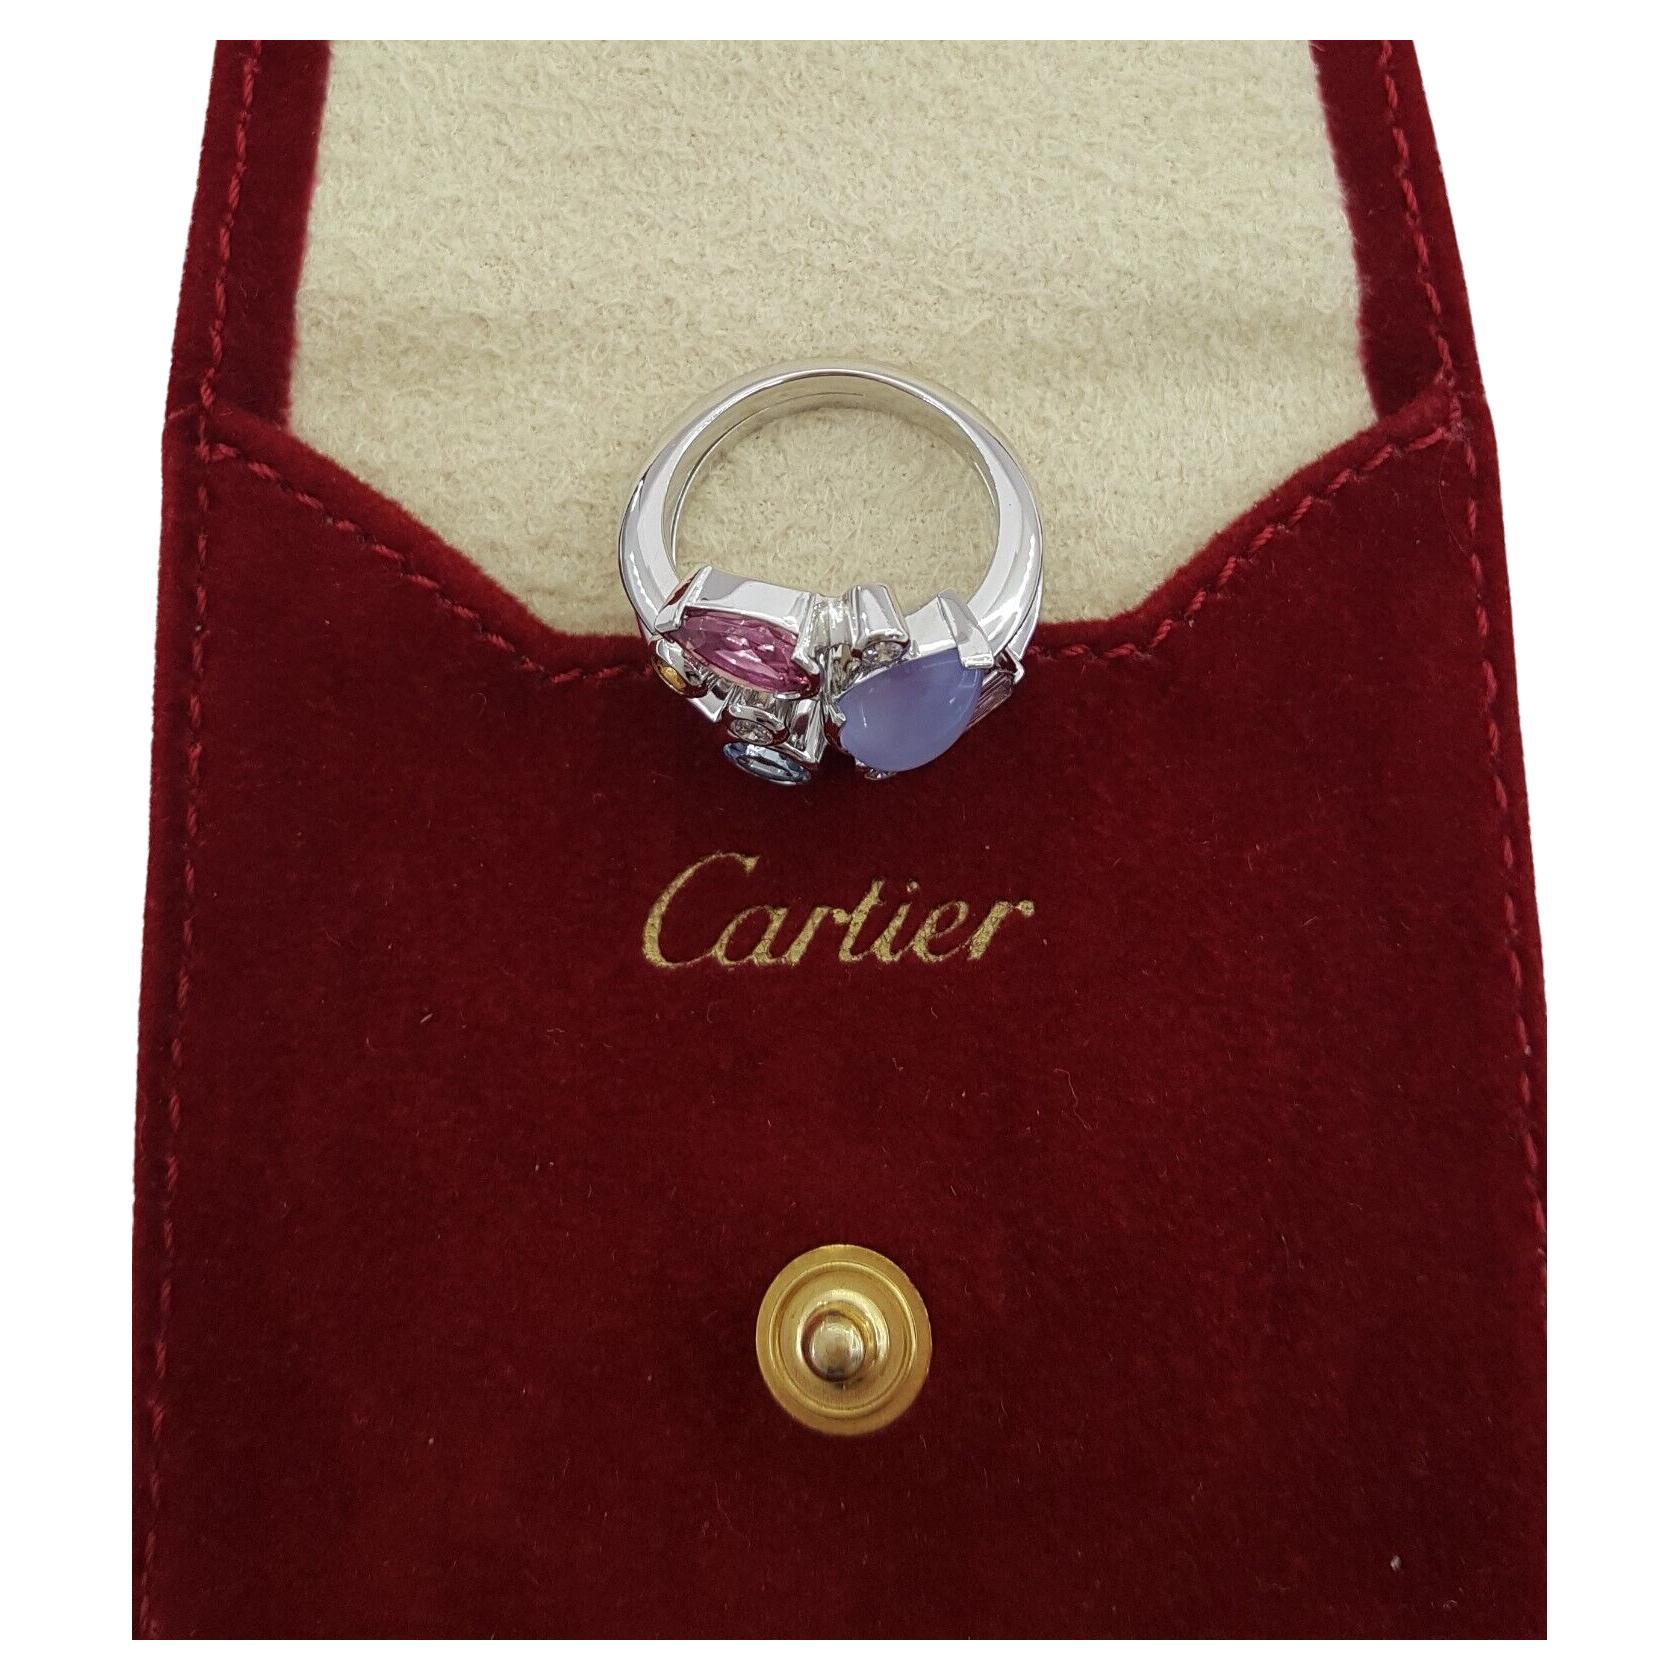 Cartier Platinum Ring adorned with Diamonds and Multicolor Gemstones, sized 52 in the French system or US 6. This exquisite piece, weighing 11.2 grams of solid Platinum, boasts a width of 17.6mm. The design features 3 Natural Round Brilliant Cut